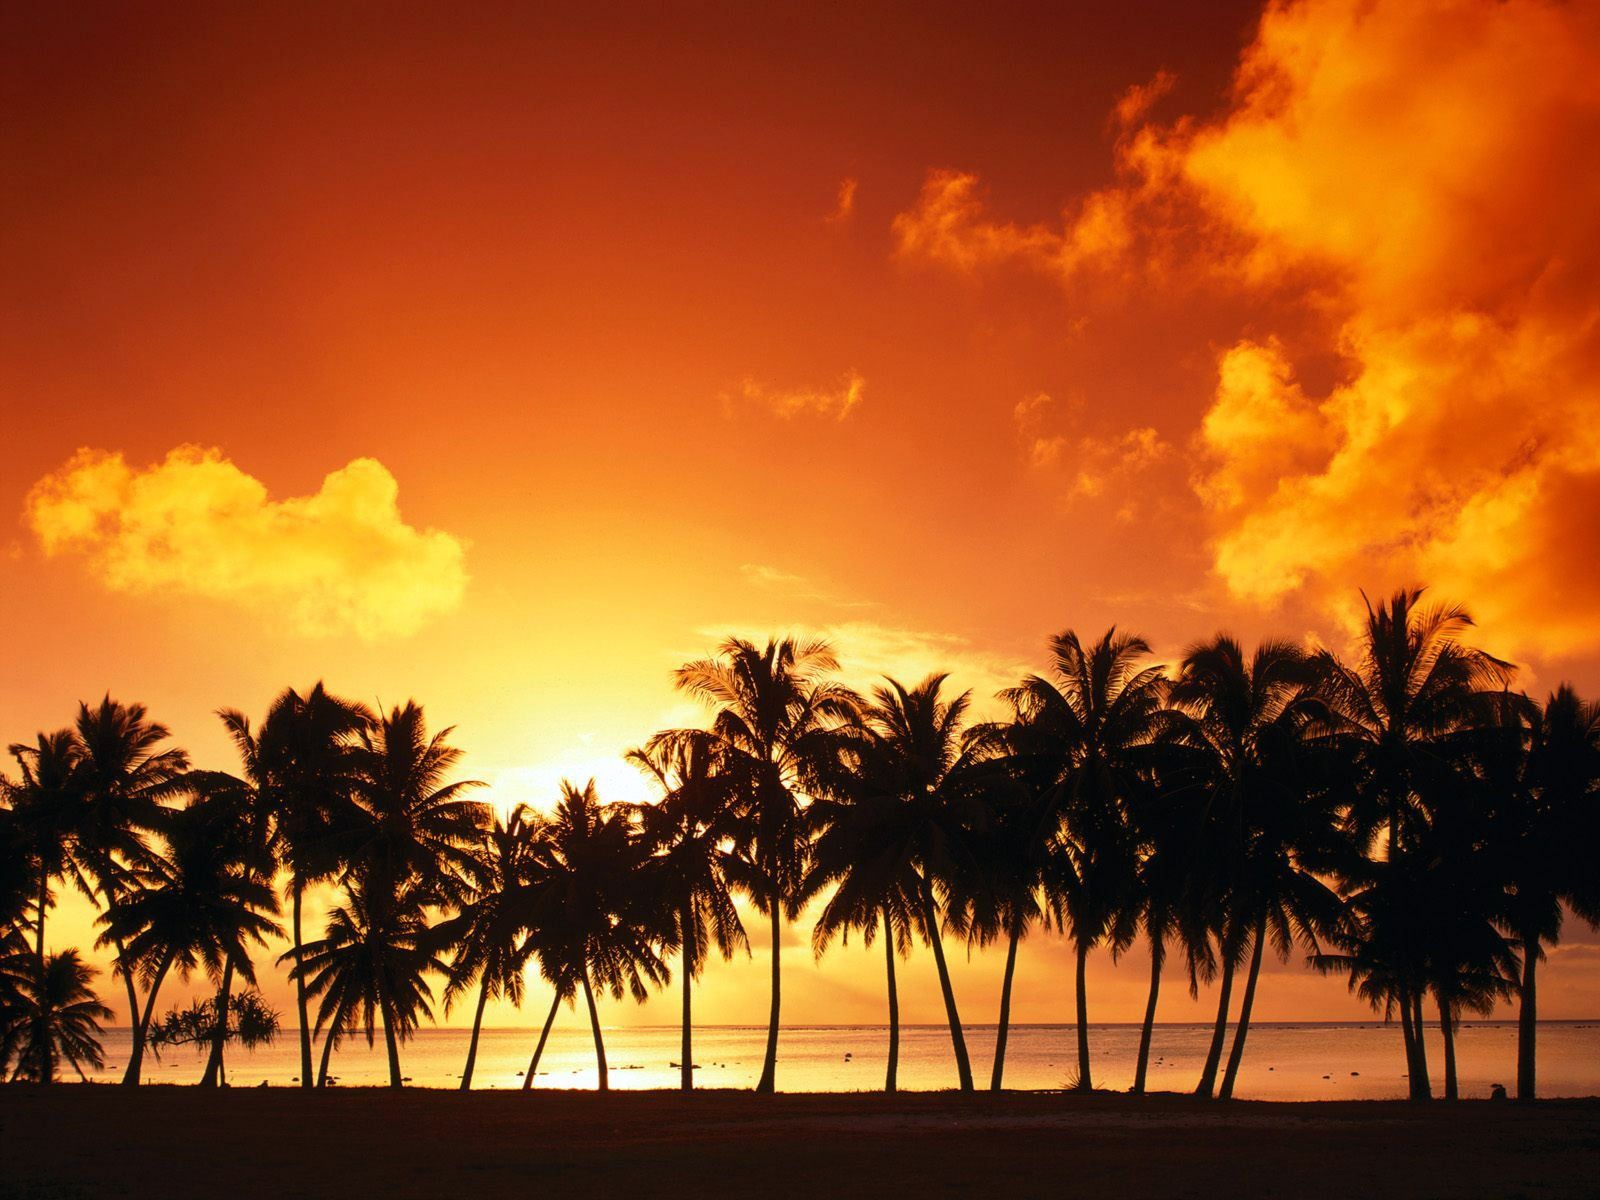 Palm Tree Sunset Wallpaper Landscape Nature Wallpaper in jpg format for free download